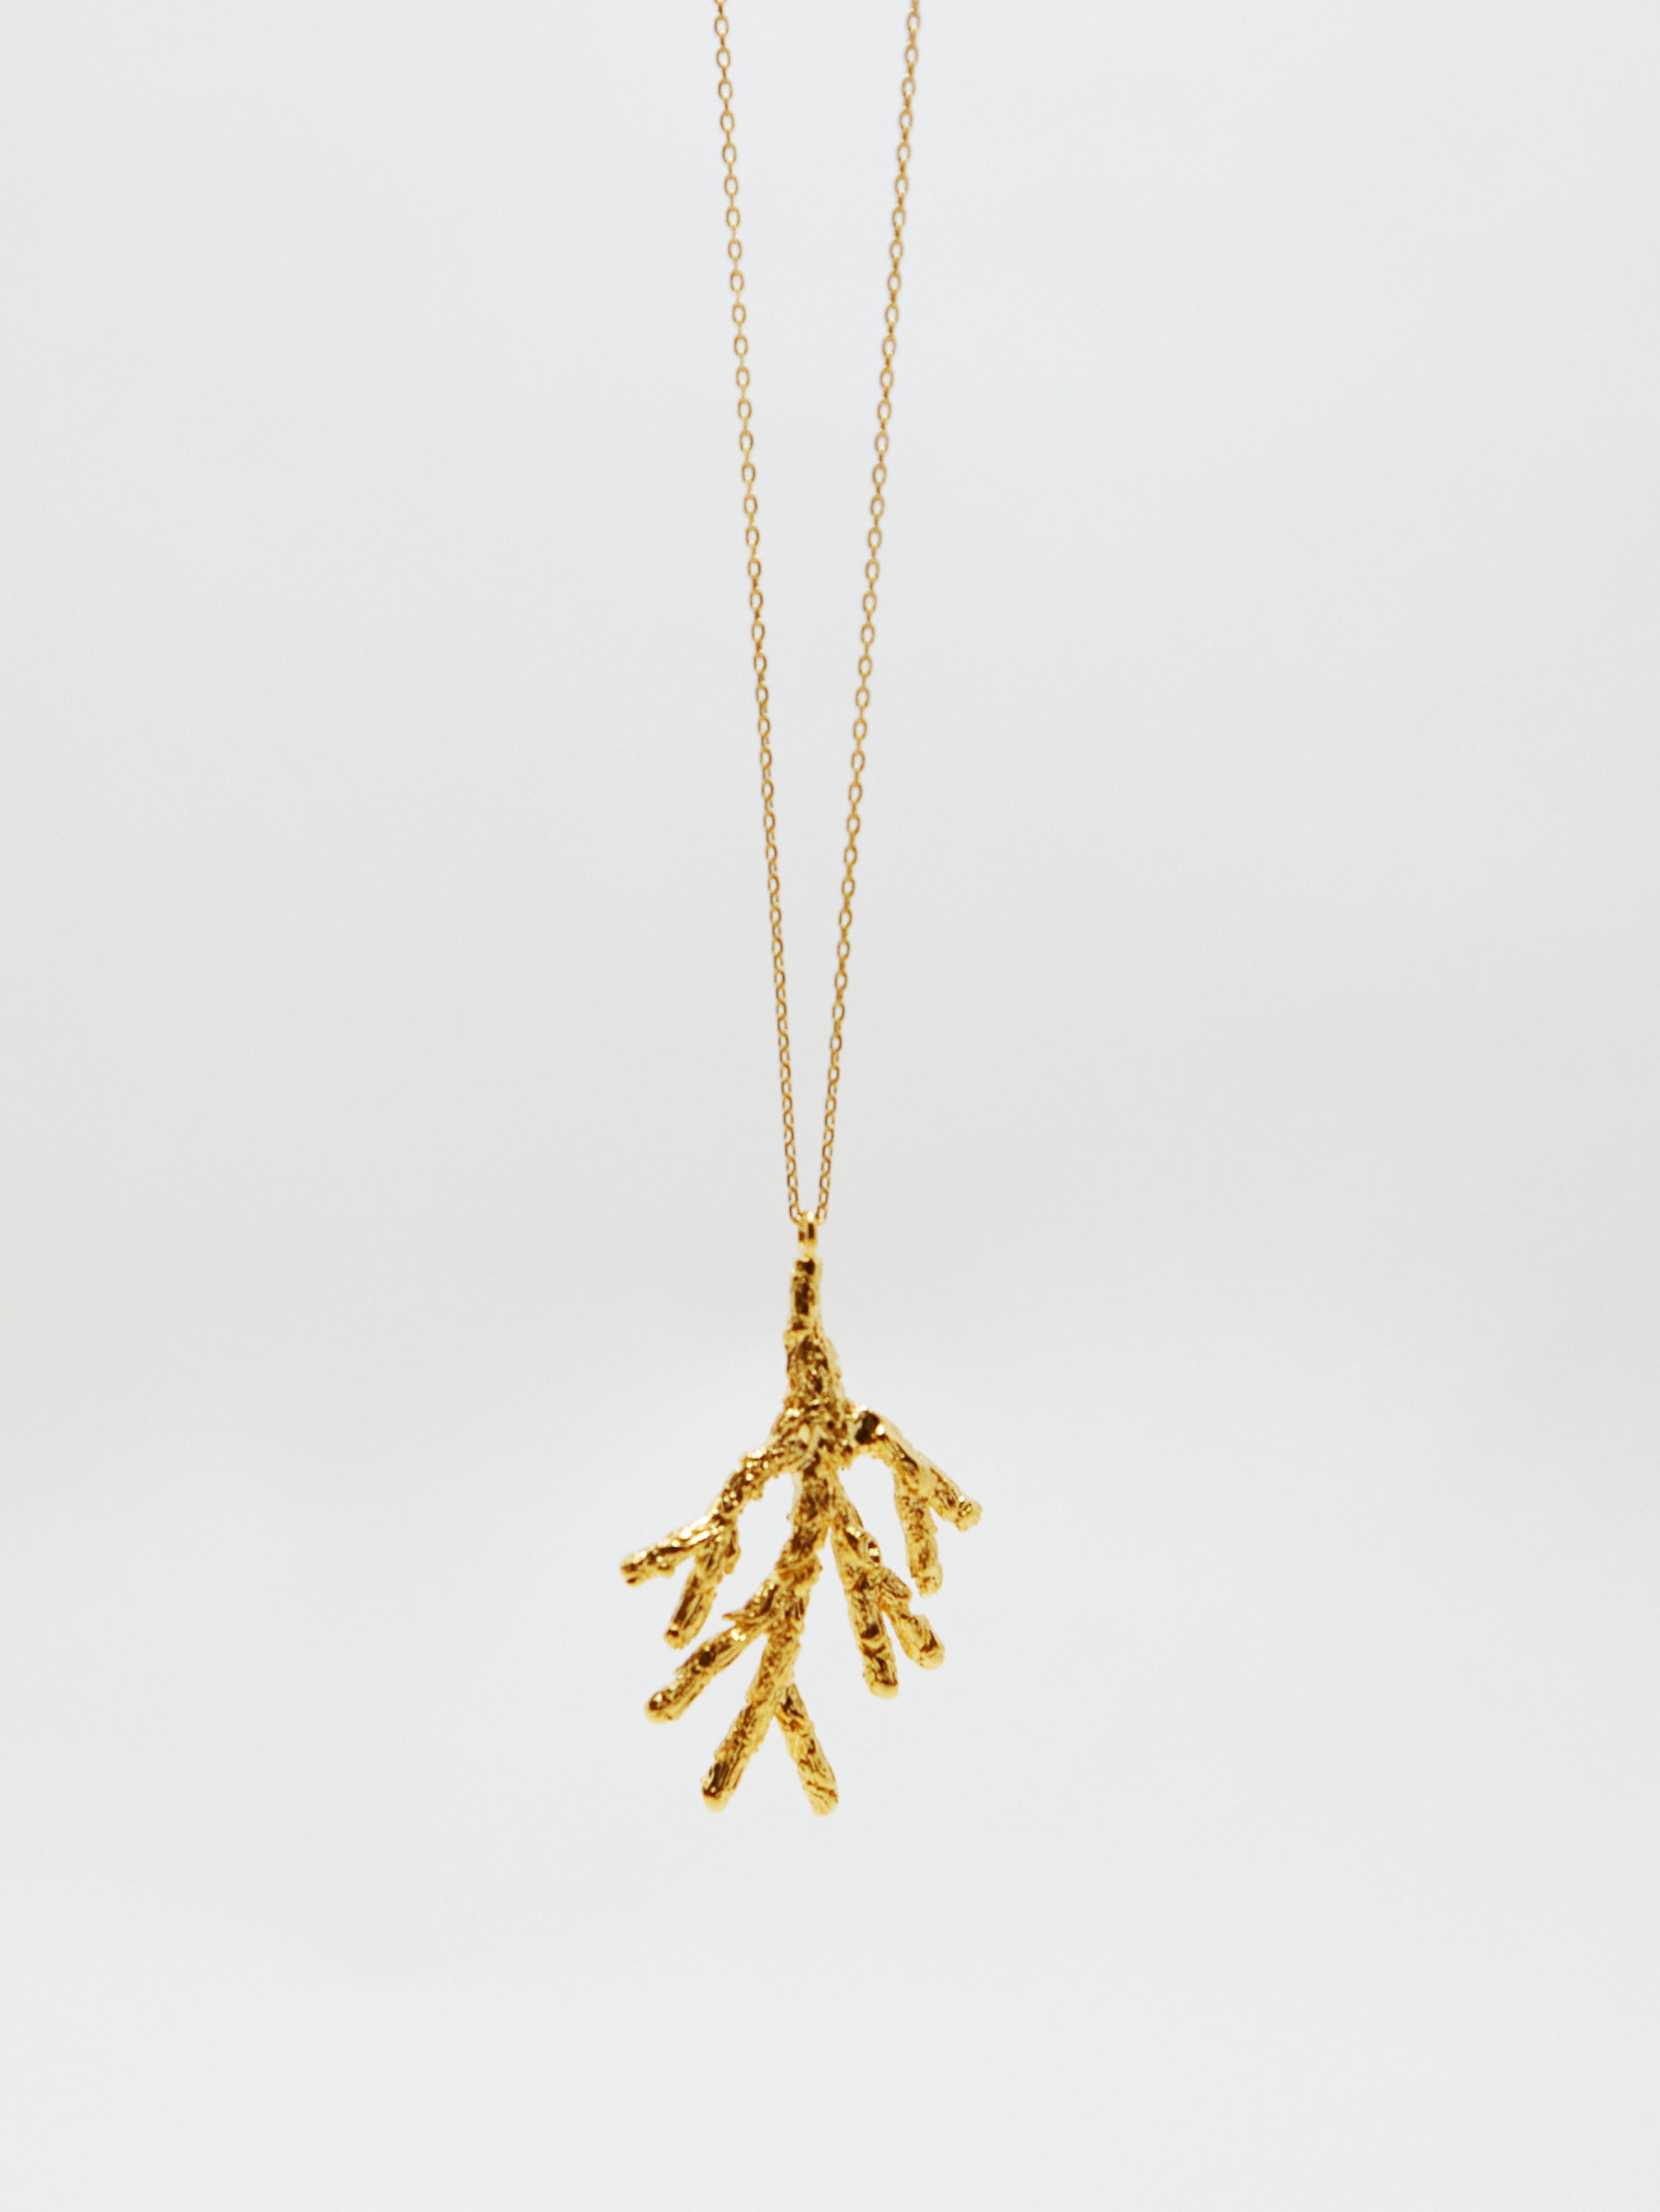 Gold tree necklace